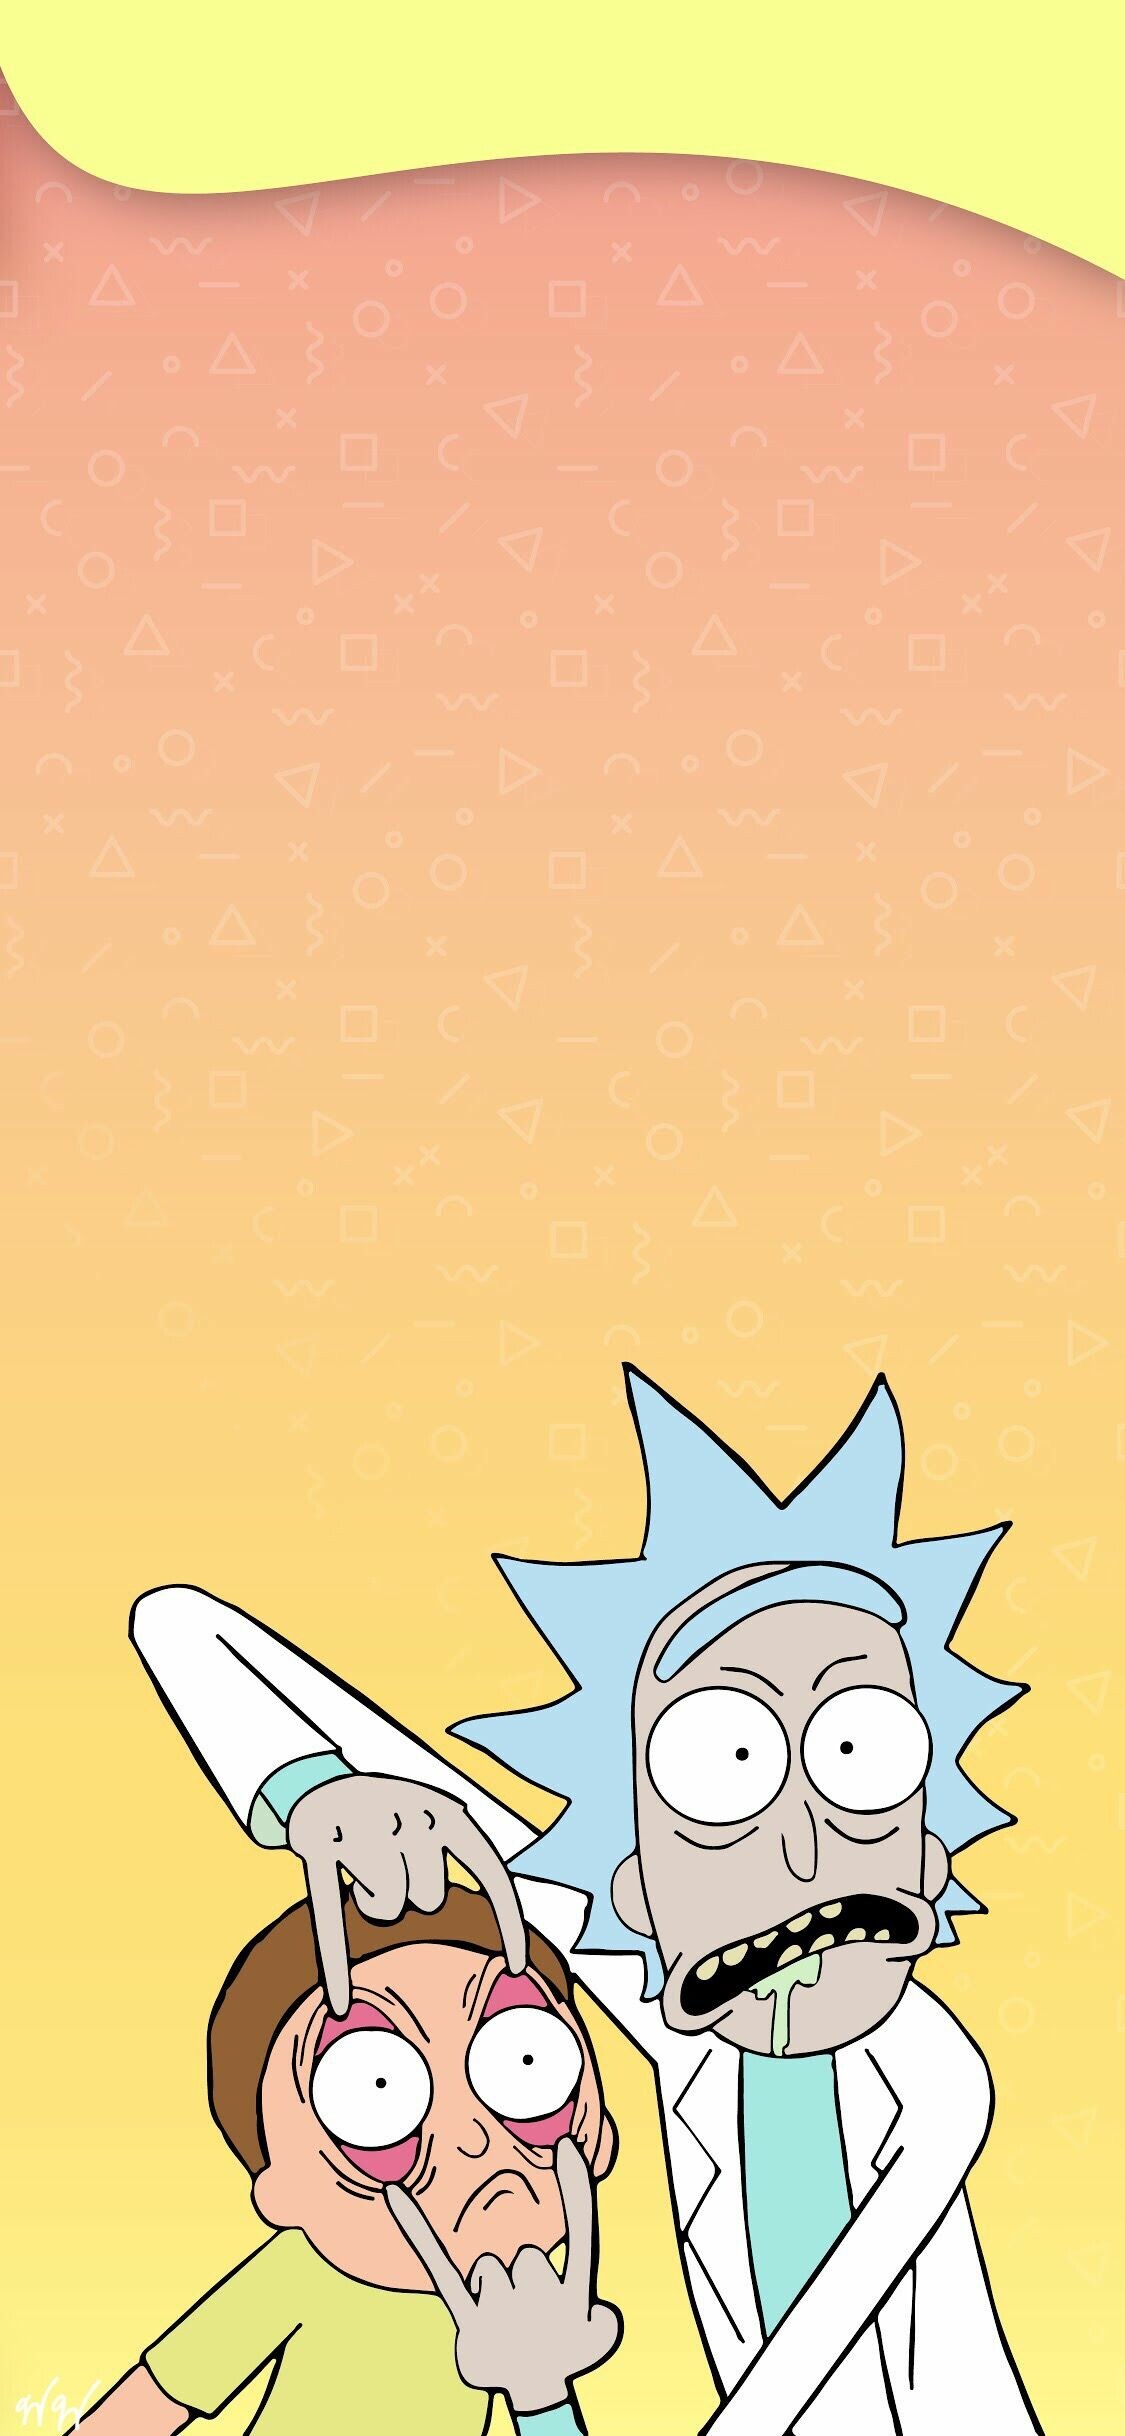 Rick and Morty: An extremely selfish, alcoholic grandfather dragging his grandson along for interdimensional adventures. 1130x2440 HD Background.